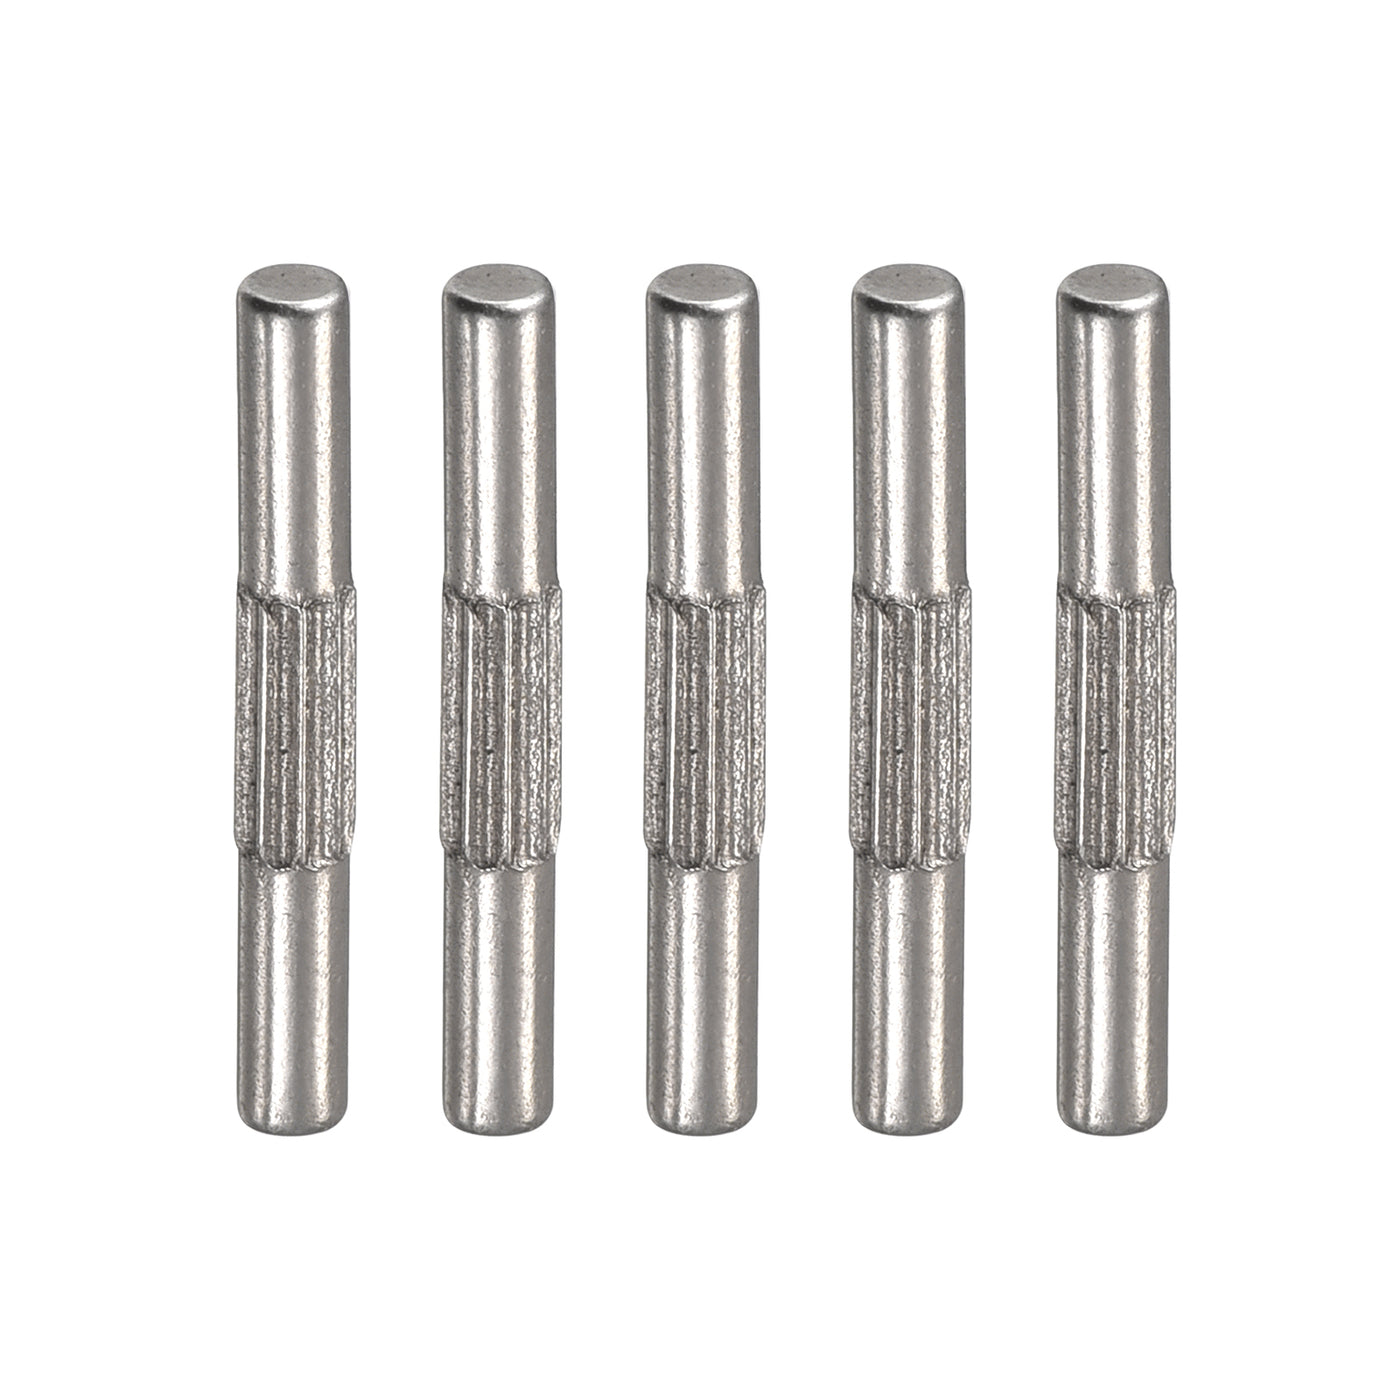 uxcell Uxcell 2x16mm 304 Stainless Steel Dowel Pins, 5Pcs Center Knurled Chamfered End Pin